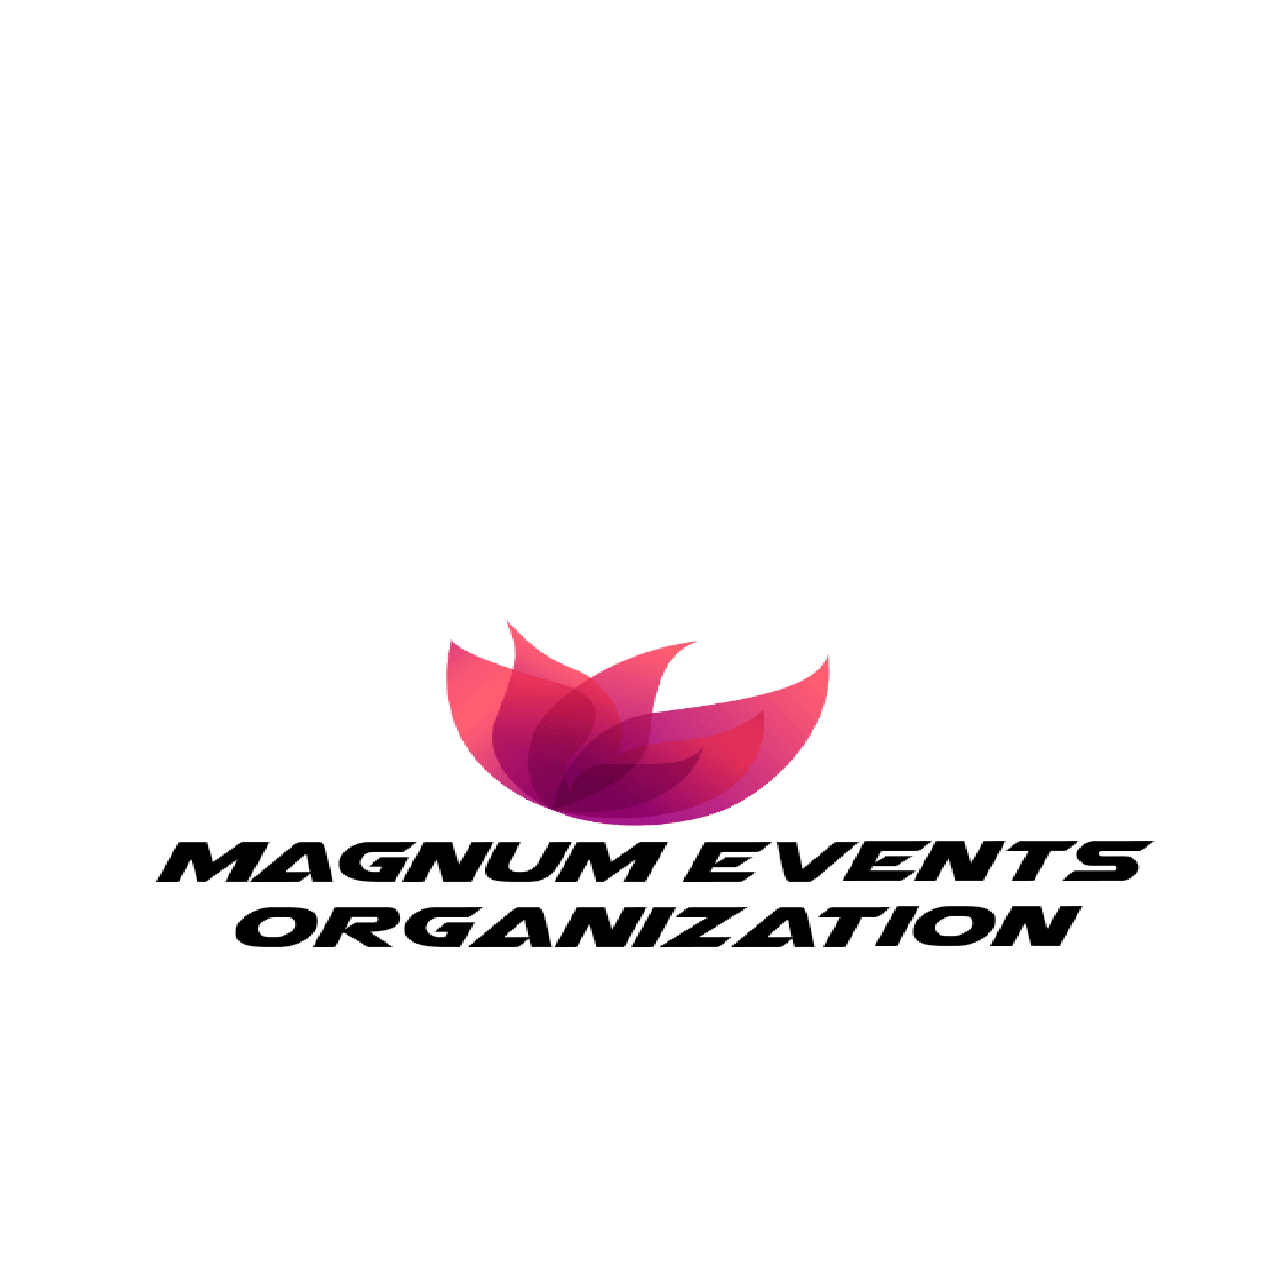 Magnum Marriage and Events Organization